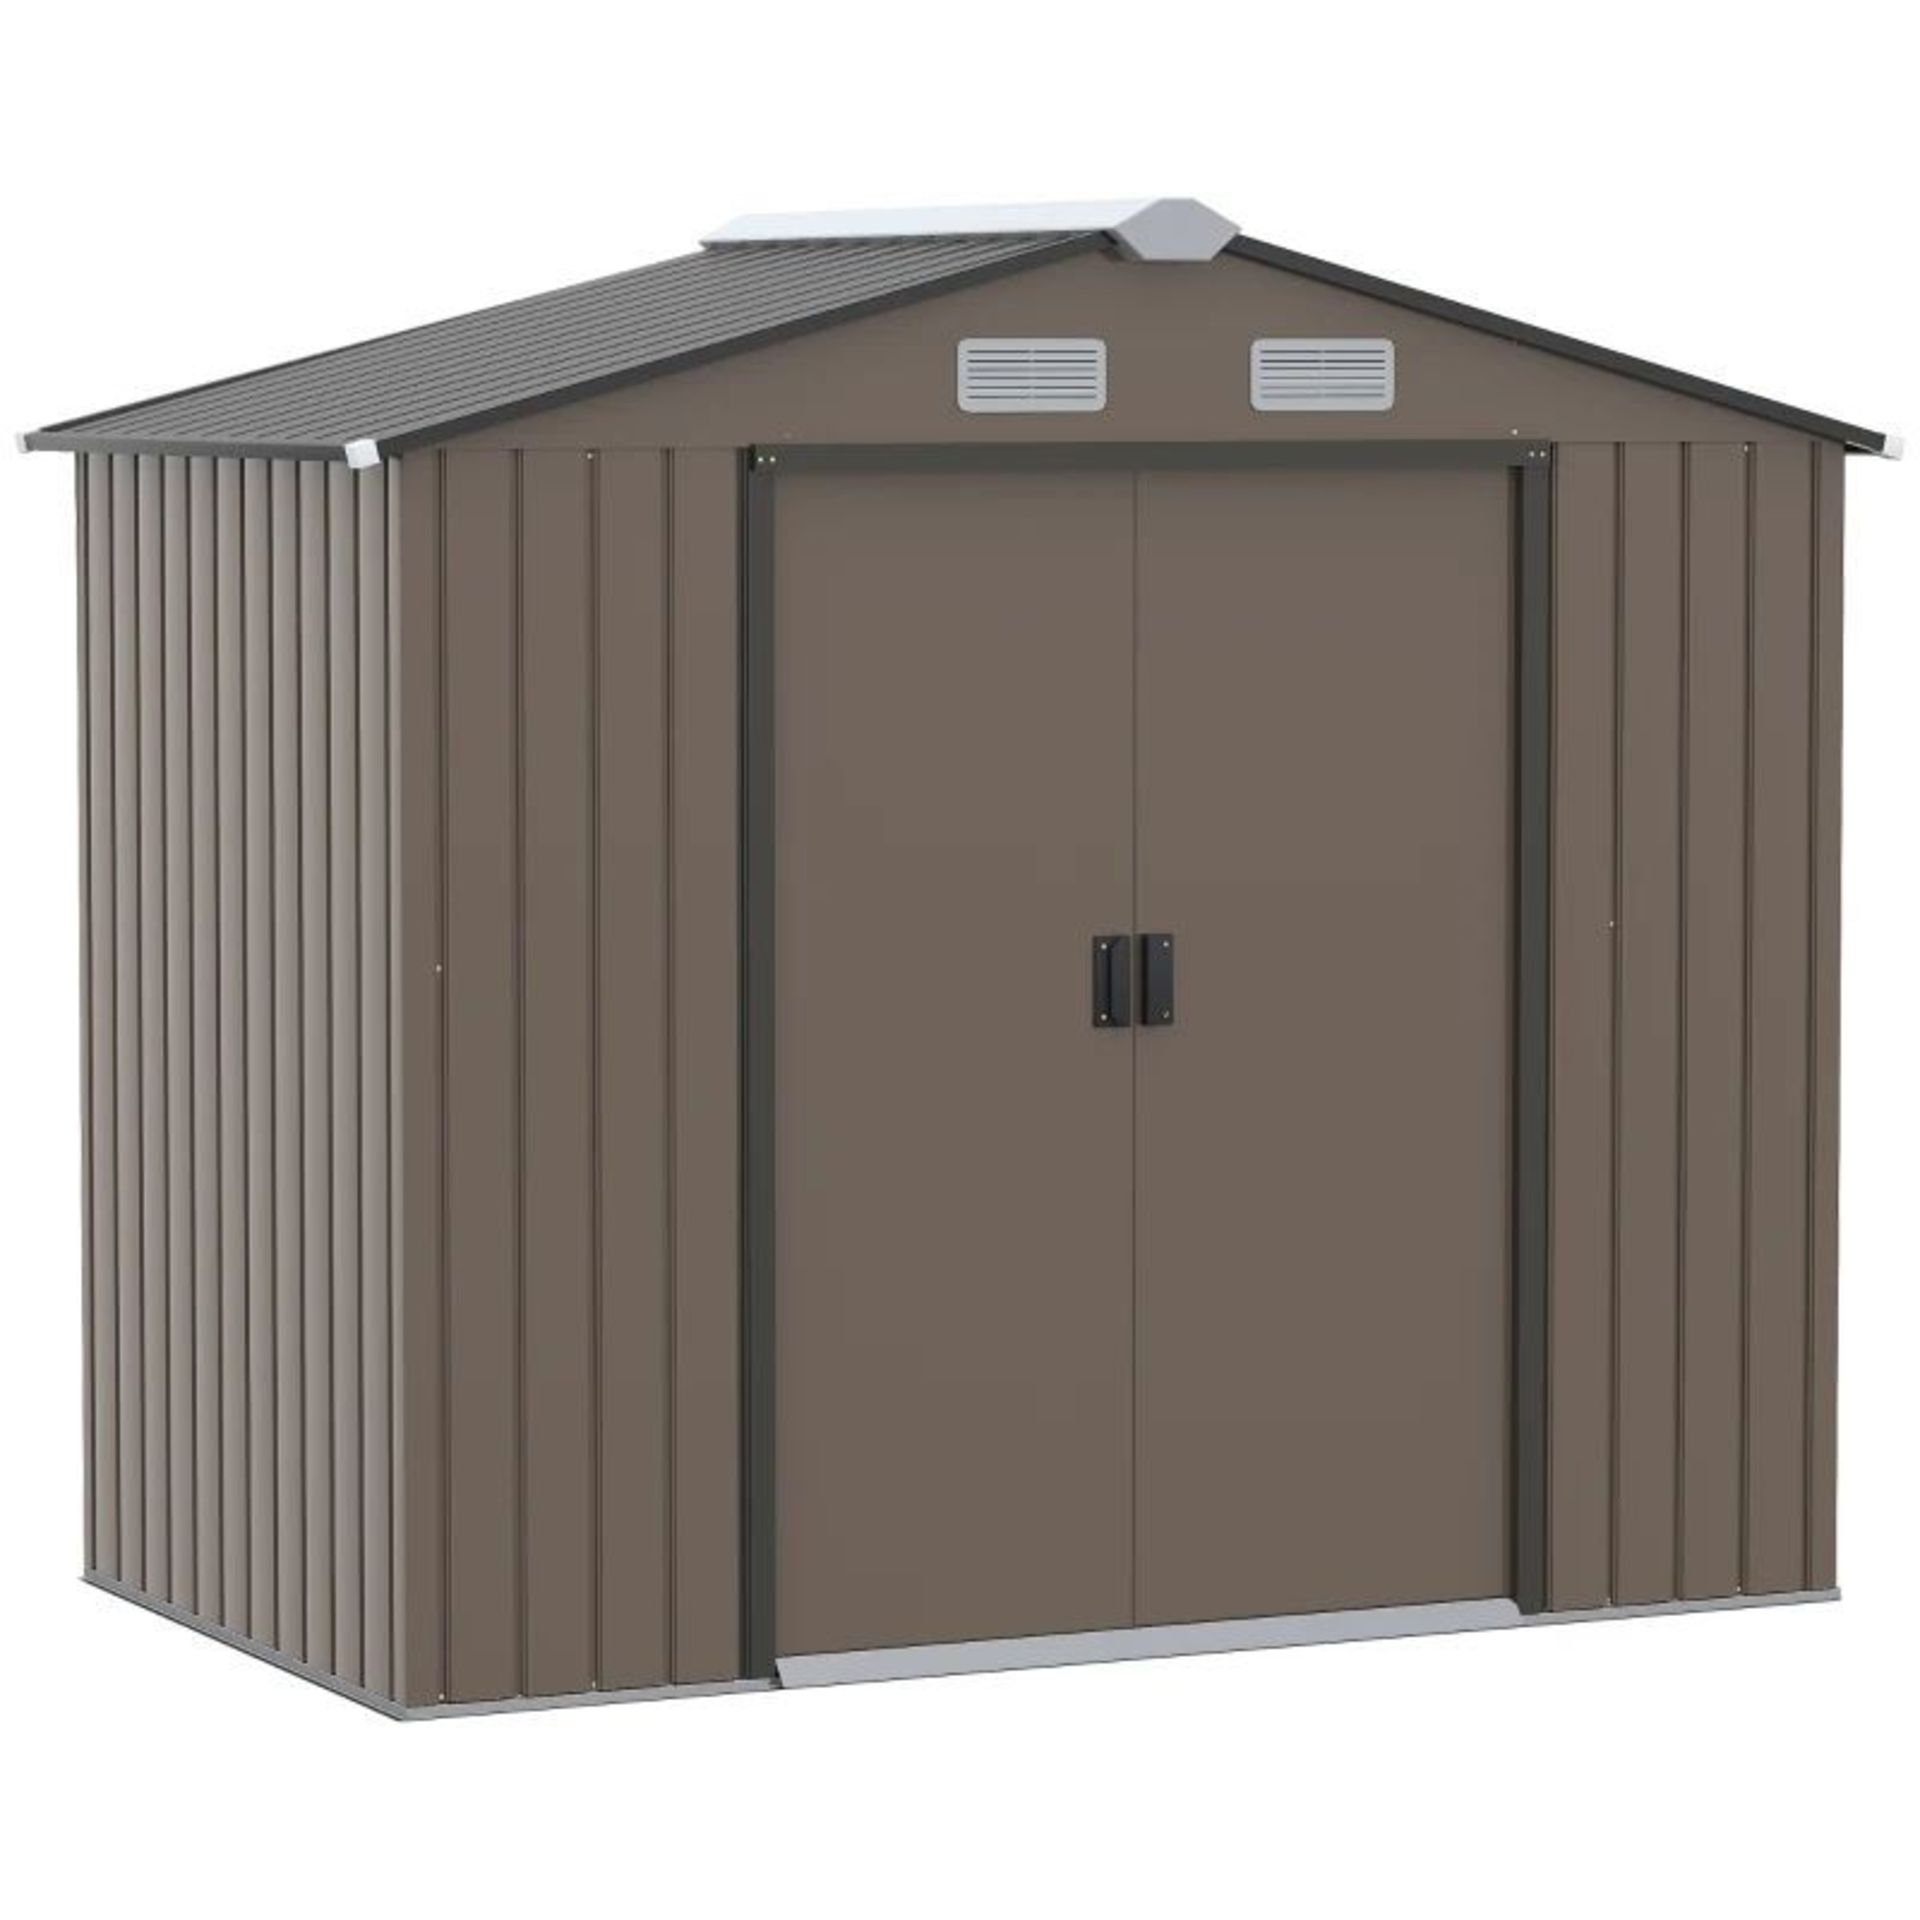 Outsunny 7 x 4ft Garden Metal Storage Shed, Outdoor Storage Tool House with Ventilation Slots, Floor - Image 2 of 2